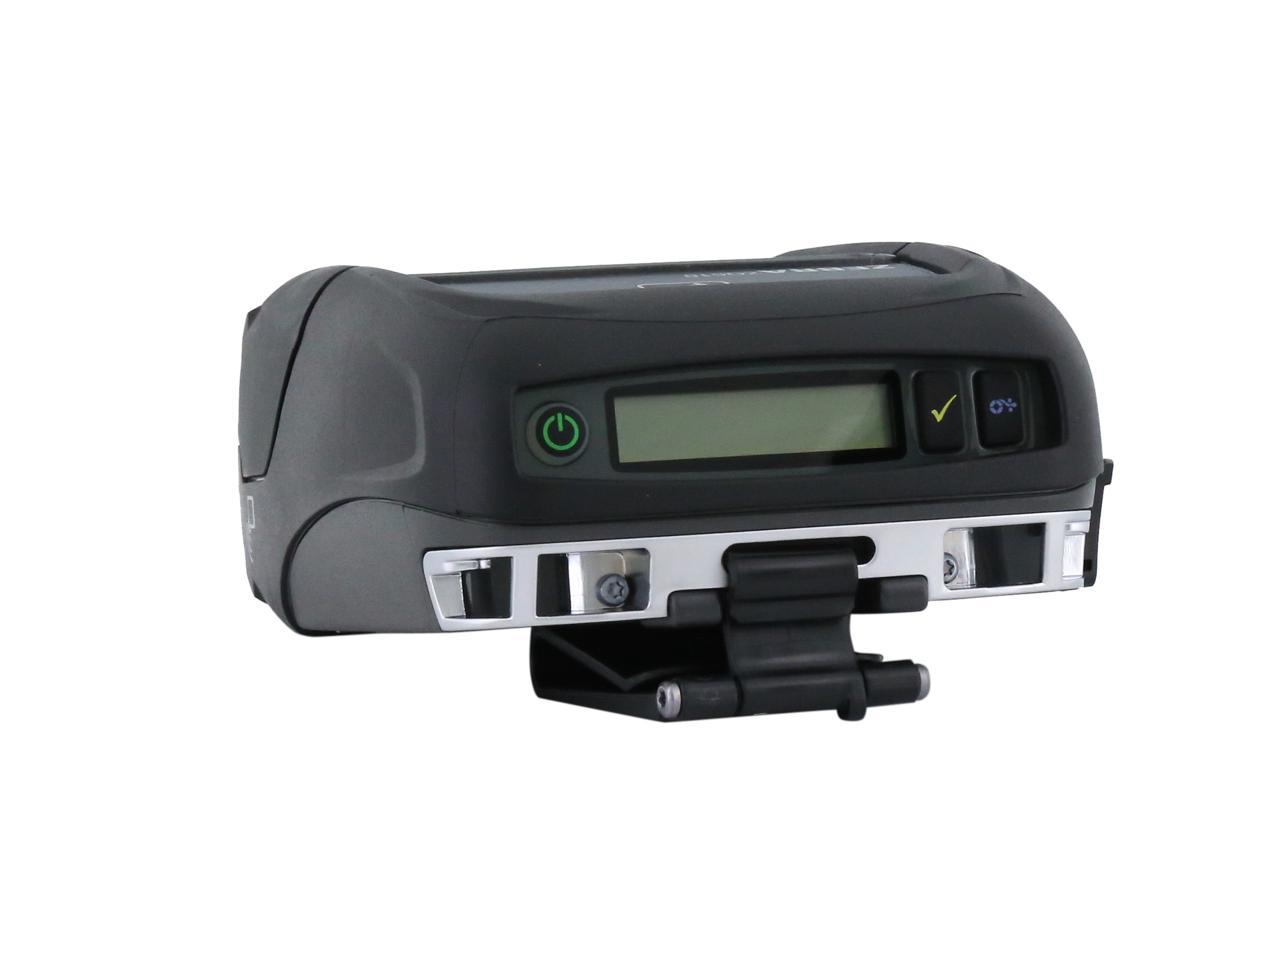 Zebra Zq510 3 Mobile Direct Thermal Receipt And Label Printer 203 Dpi Bluetooth 40 Linered 5641